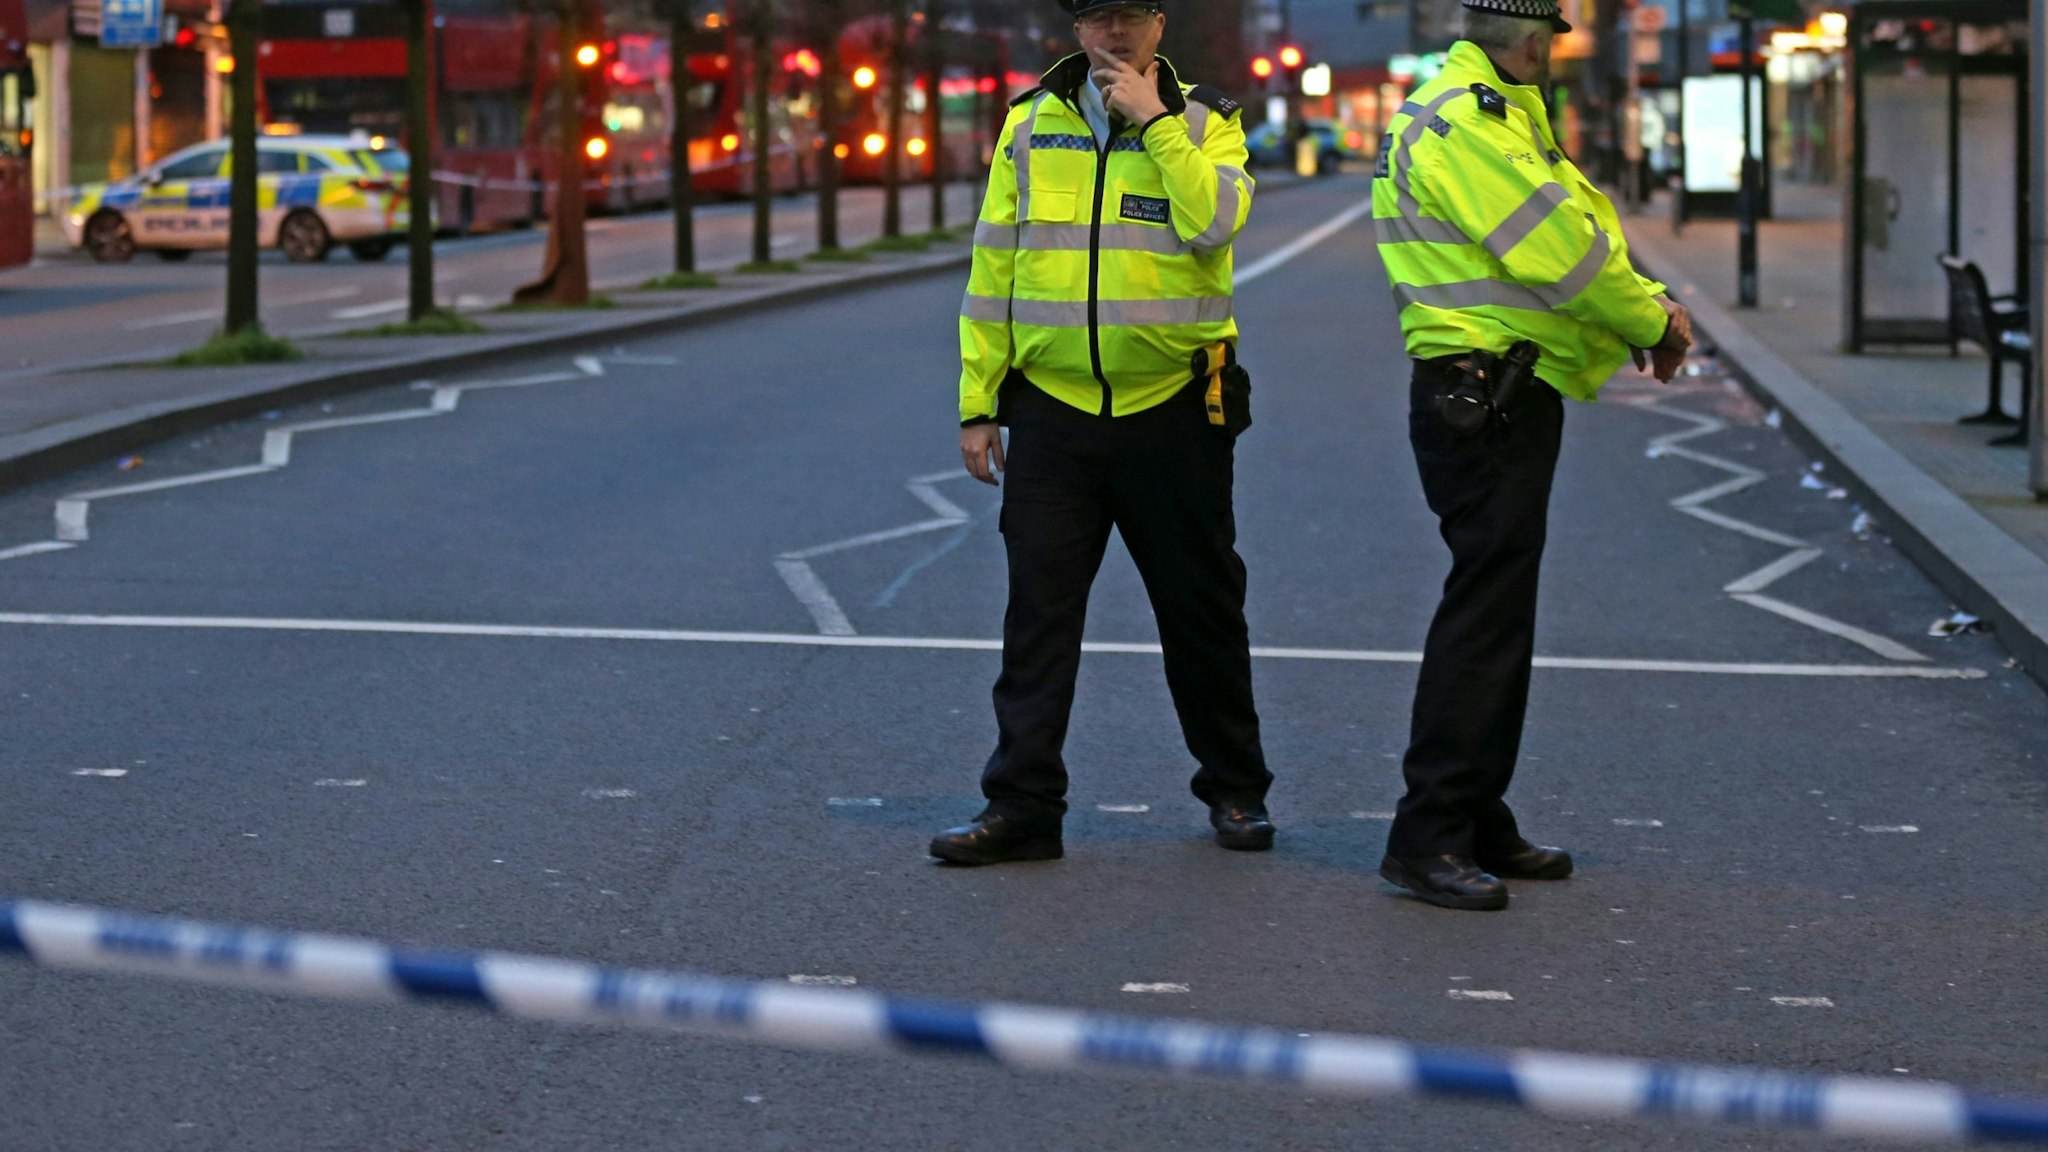 Police officers guard a cordon, set up on Streatham High Road, at the junction of Woodbourne Road, in south London on February 2, 2020, after a man is shot dead by police following reports of people being stabbed in the street. - British police on Sunday said they had shot a man in south London, after at least two people were stabbed in a suspected "terrorist-related" incident. (Photo by ISABEL INFANTES / AFP) (Photo by ISABEL INFANTES/AFP via Getty Images)